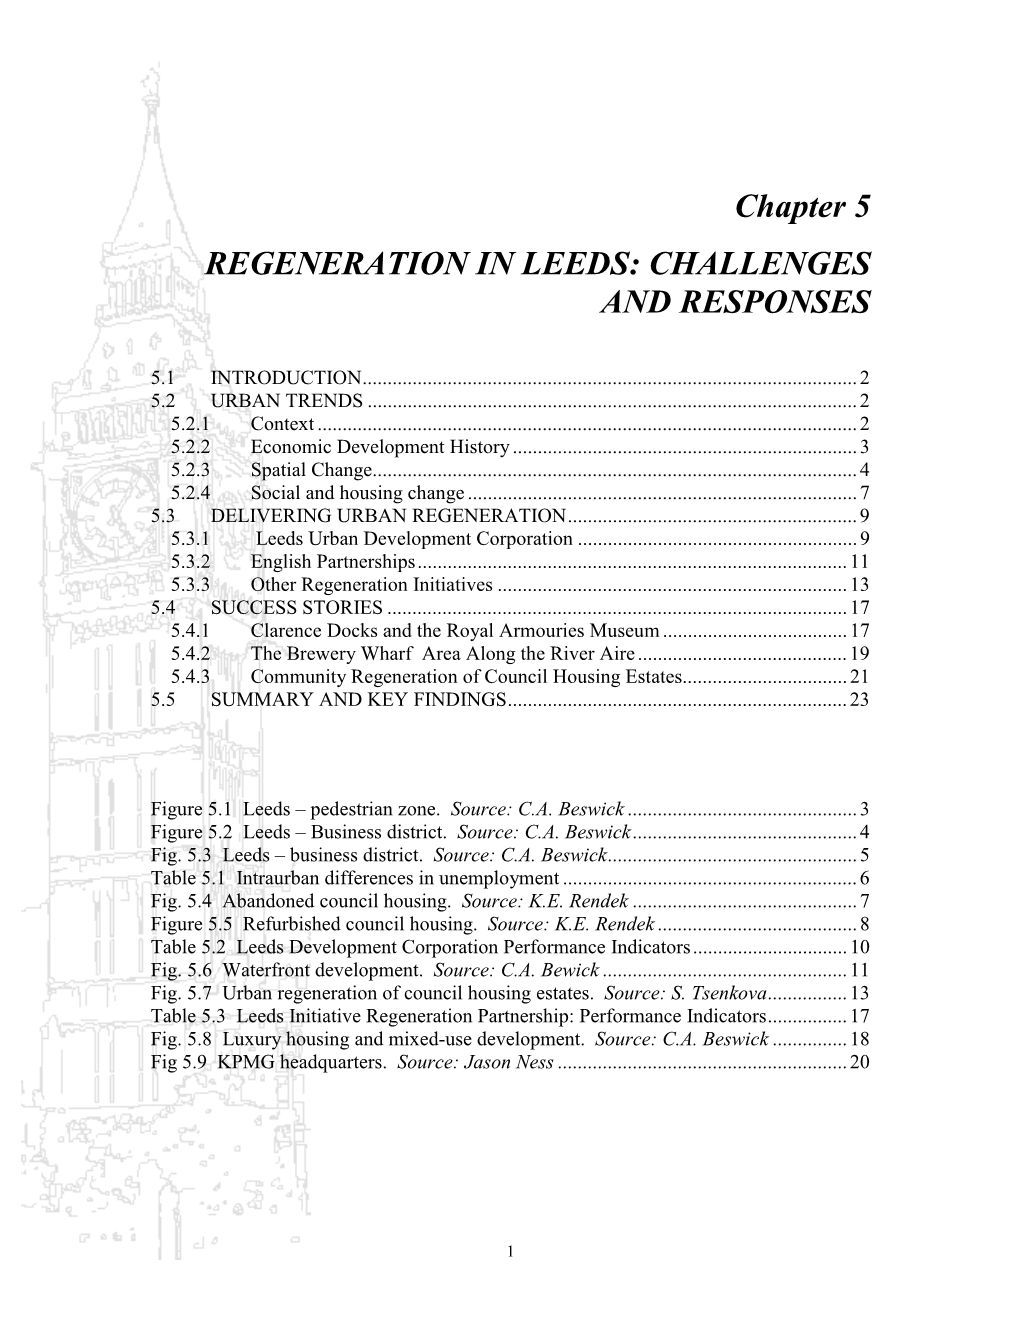 Chapter 5 REGENERATION in LEEDS: CHALLENGES and RESPONSES